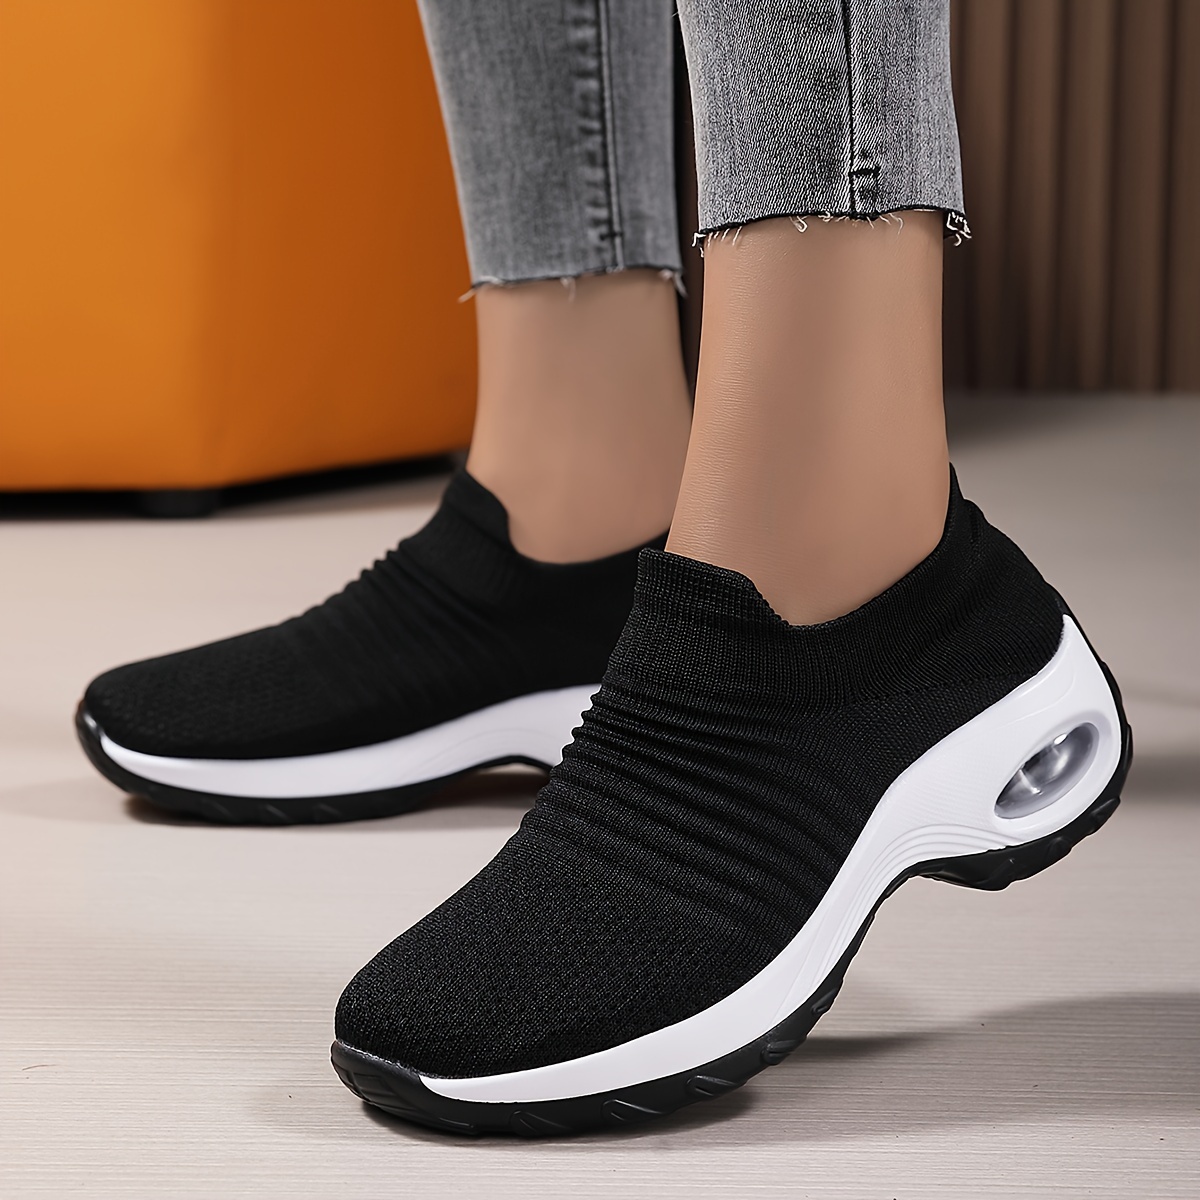 HSMQHJWE Women Slip On Sneaker Sneaker For Women Women'S Lace Up Soft Sole  Comfortable Shoes Outdoor Mesh Shoes Runing Fashion Sports Breathable